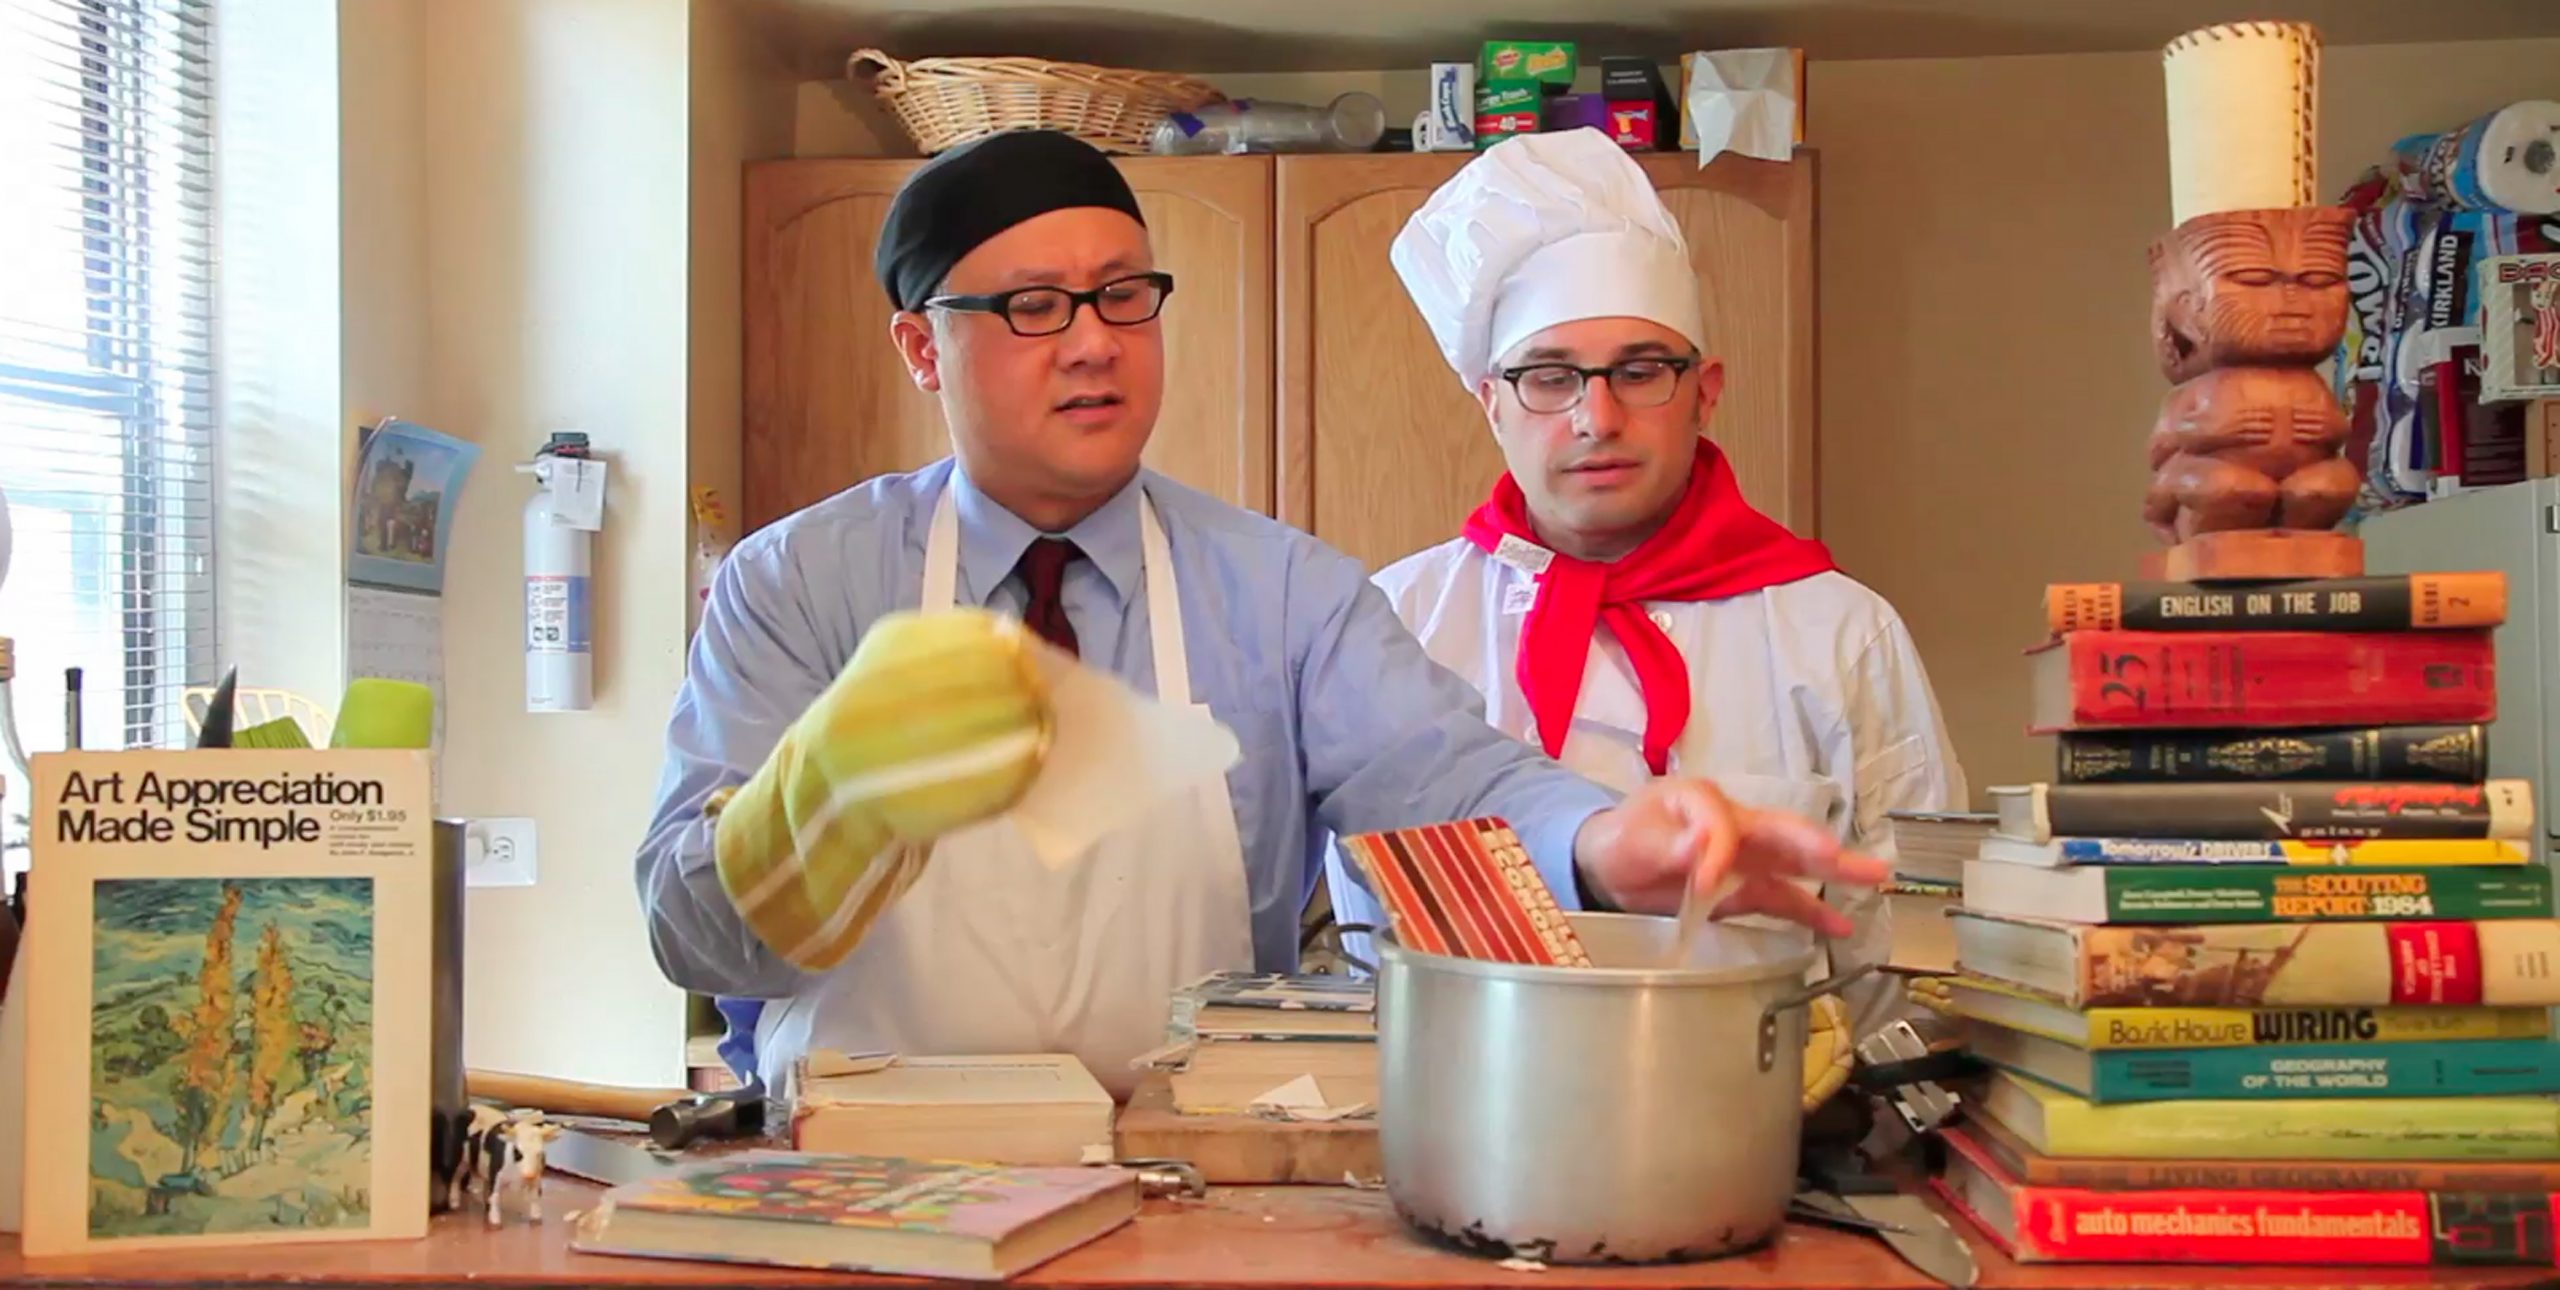 A video still of artists Larry Lee and Jason Dunda in Jason’s kitchen literally cooking books in a mock cooking show skit whose characters are based vaguely on the 1980’s PBS cooking star Martin Yan from Yan Can Cook and the Muppet Show’s Swedish Chef. Larry is a Chinese American man dressed in a blue button-down shirt with a maroon tie and a white apron and he wears a black skull cap and black glasses. Larry wears a yellow mitt and is adding torn pages into a silver soup stockpot in which an economic book is cooking on the counter in front of them. In the foreground to the left of the screen image is an Art Appreciation Made Simple book and a small figurine of a milk cow. Jason, who is a white Canadian man, looks on wearing black glasses, a white chef’s apron and hat, and a red scarf. A tall stack of old instruction manuals with titles such as English on the Job and Auto Mechanics Fundamentals is piled on the counter to the screen right of the duo. On top of the stack of books is a Tiki-style lamp. 